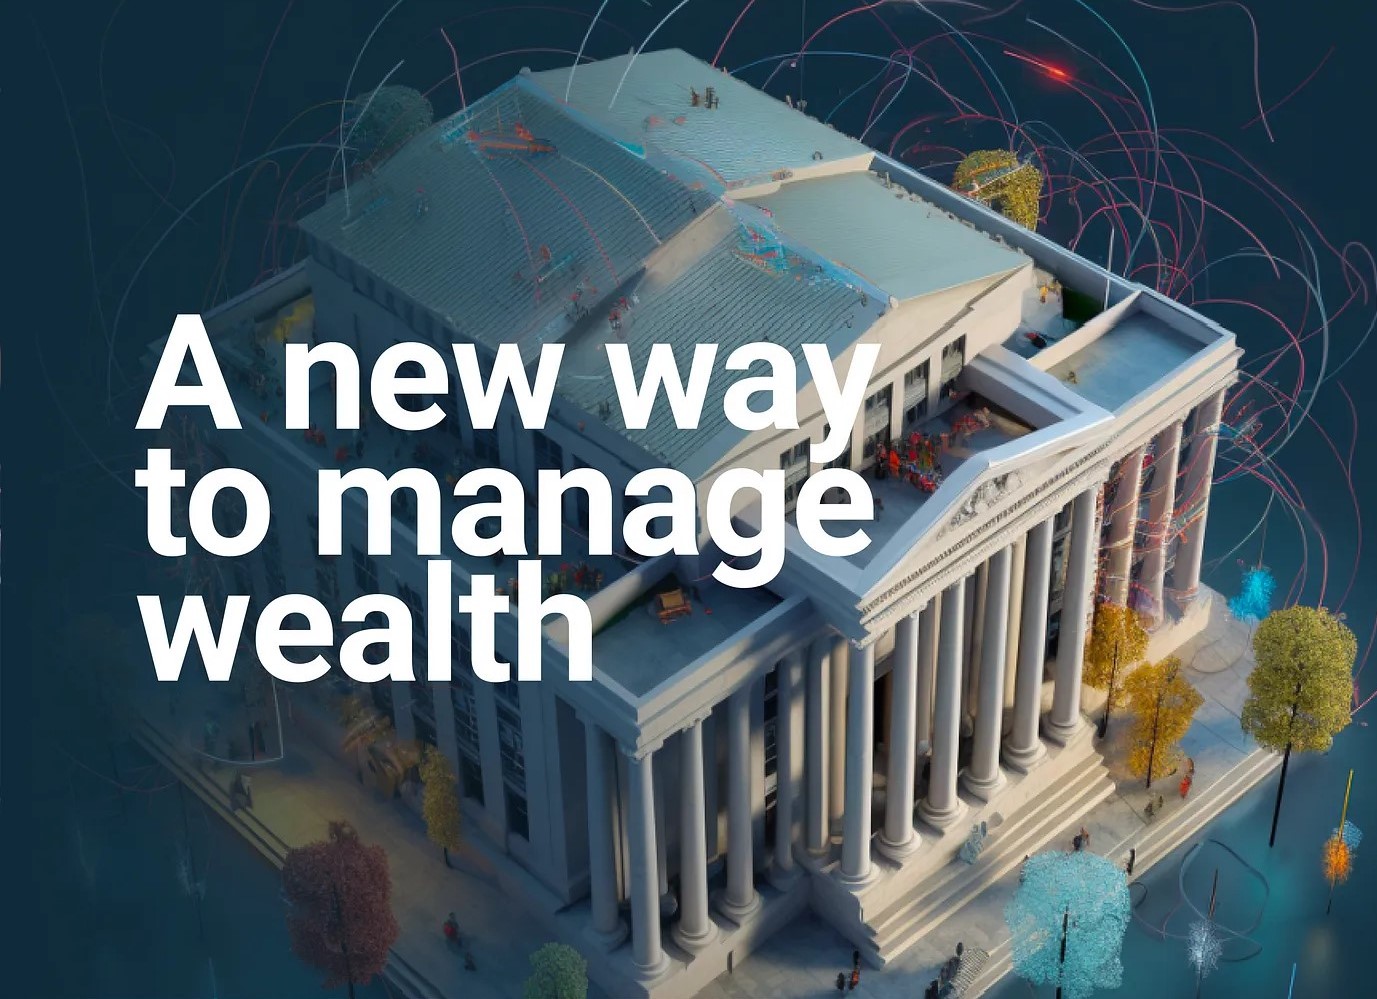 A new way to manage wealth